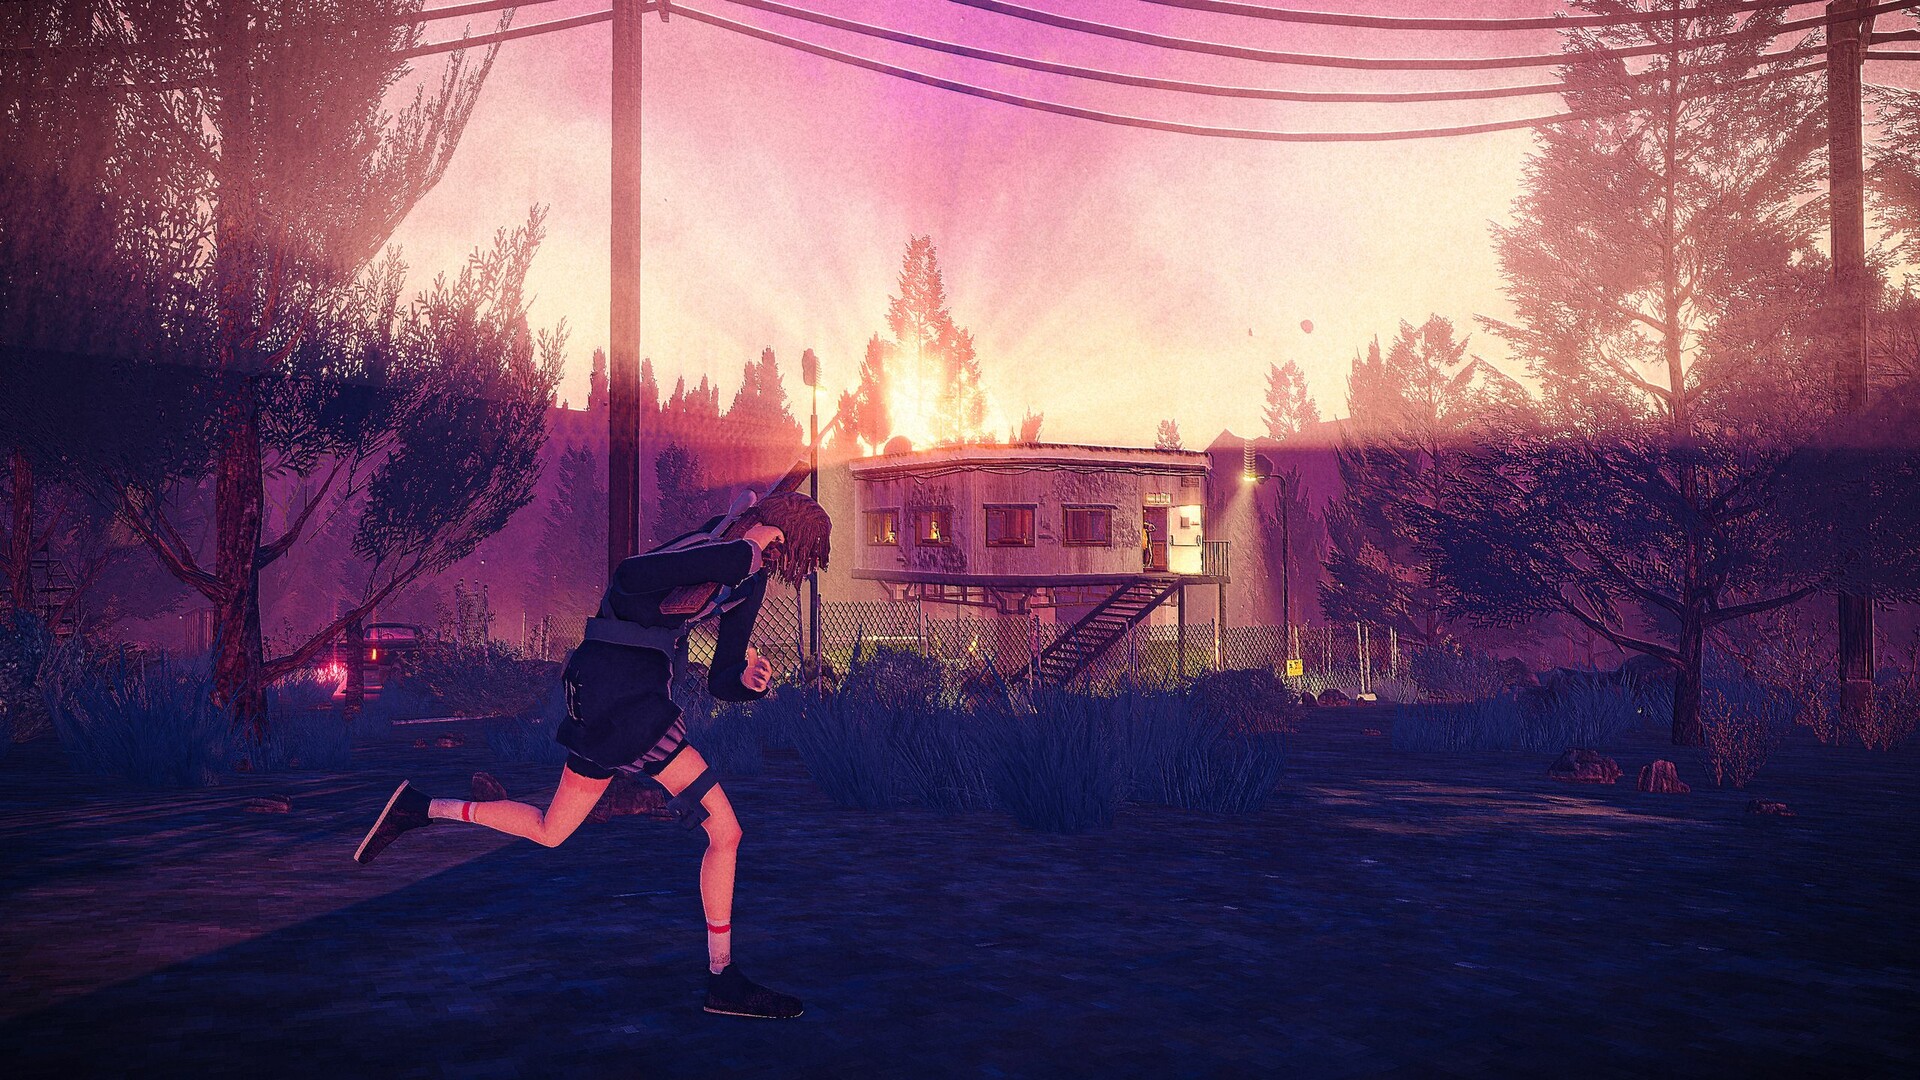 A screenshot from "Children of the Sun:" a character with a gun runs around a small building with glowing enemies inside. In the background, the sun rises over some trees